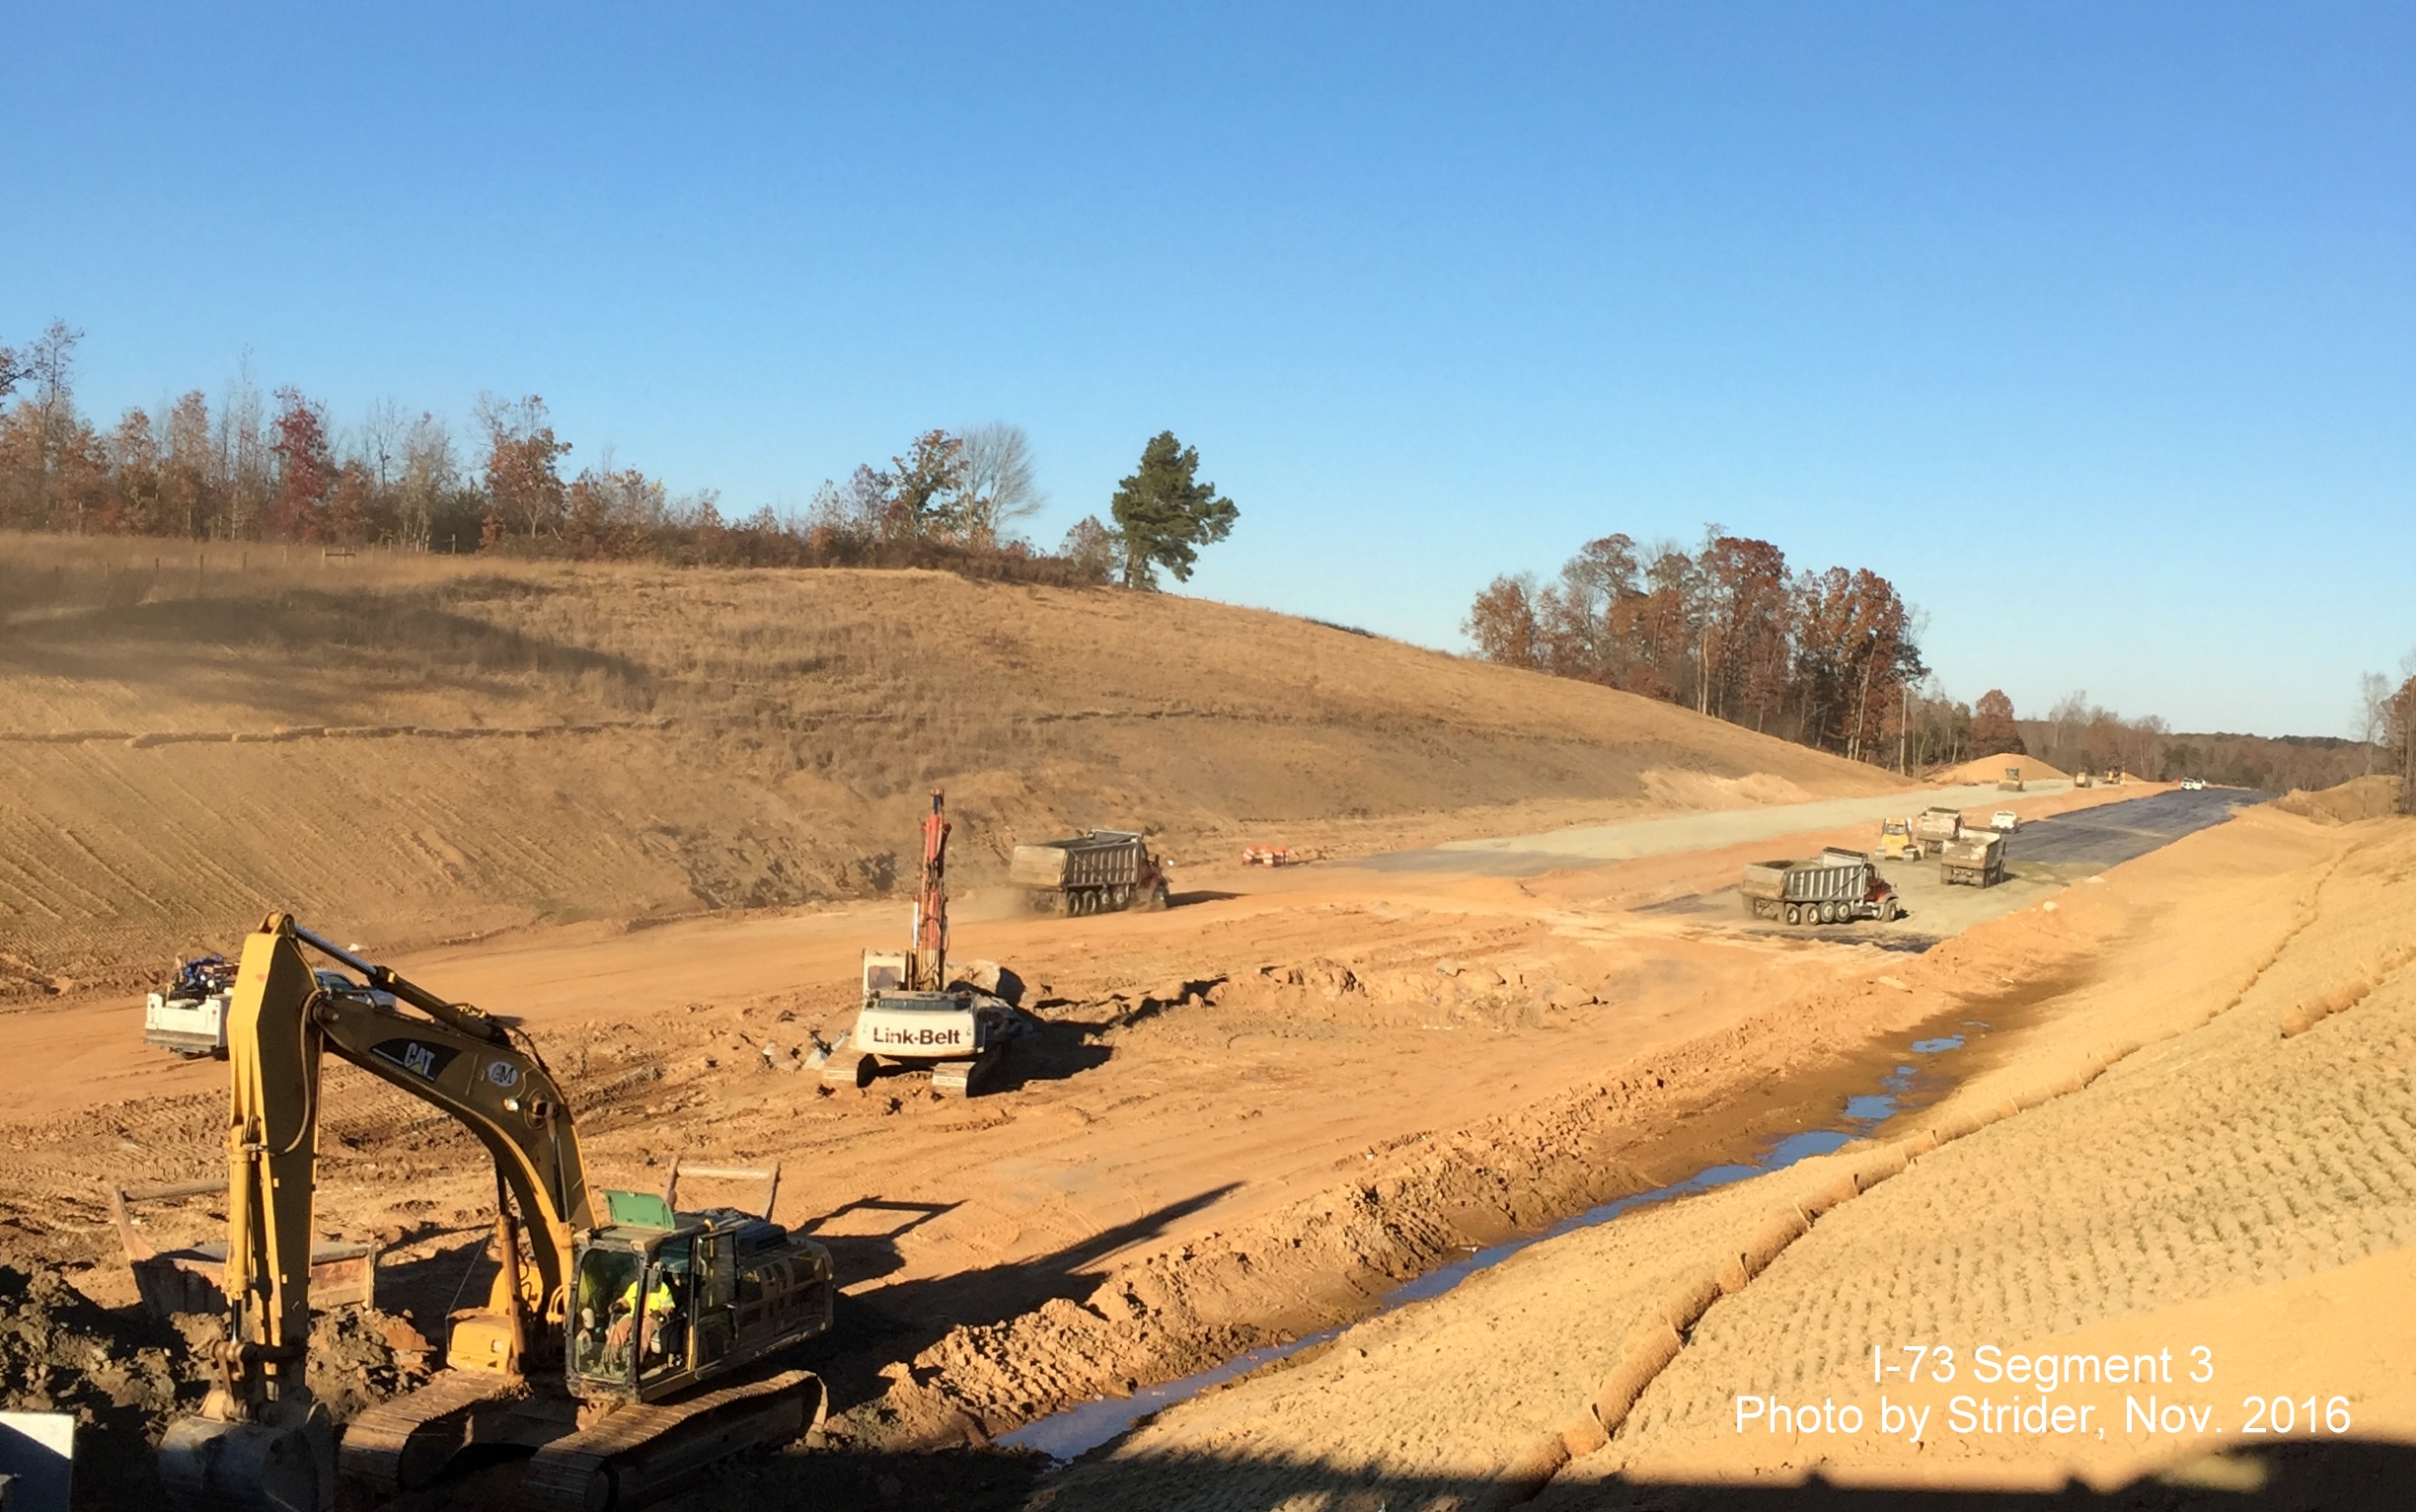 Image looking north from Bunch Road bridge showing progress constructing future lanes for I-73 near Summerfield, from Strider